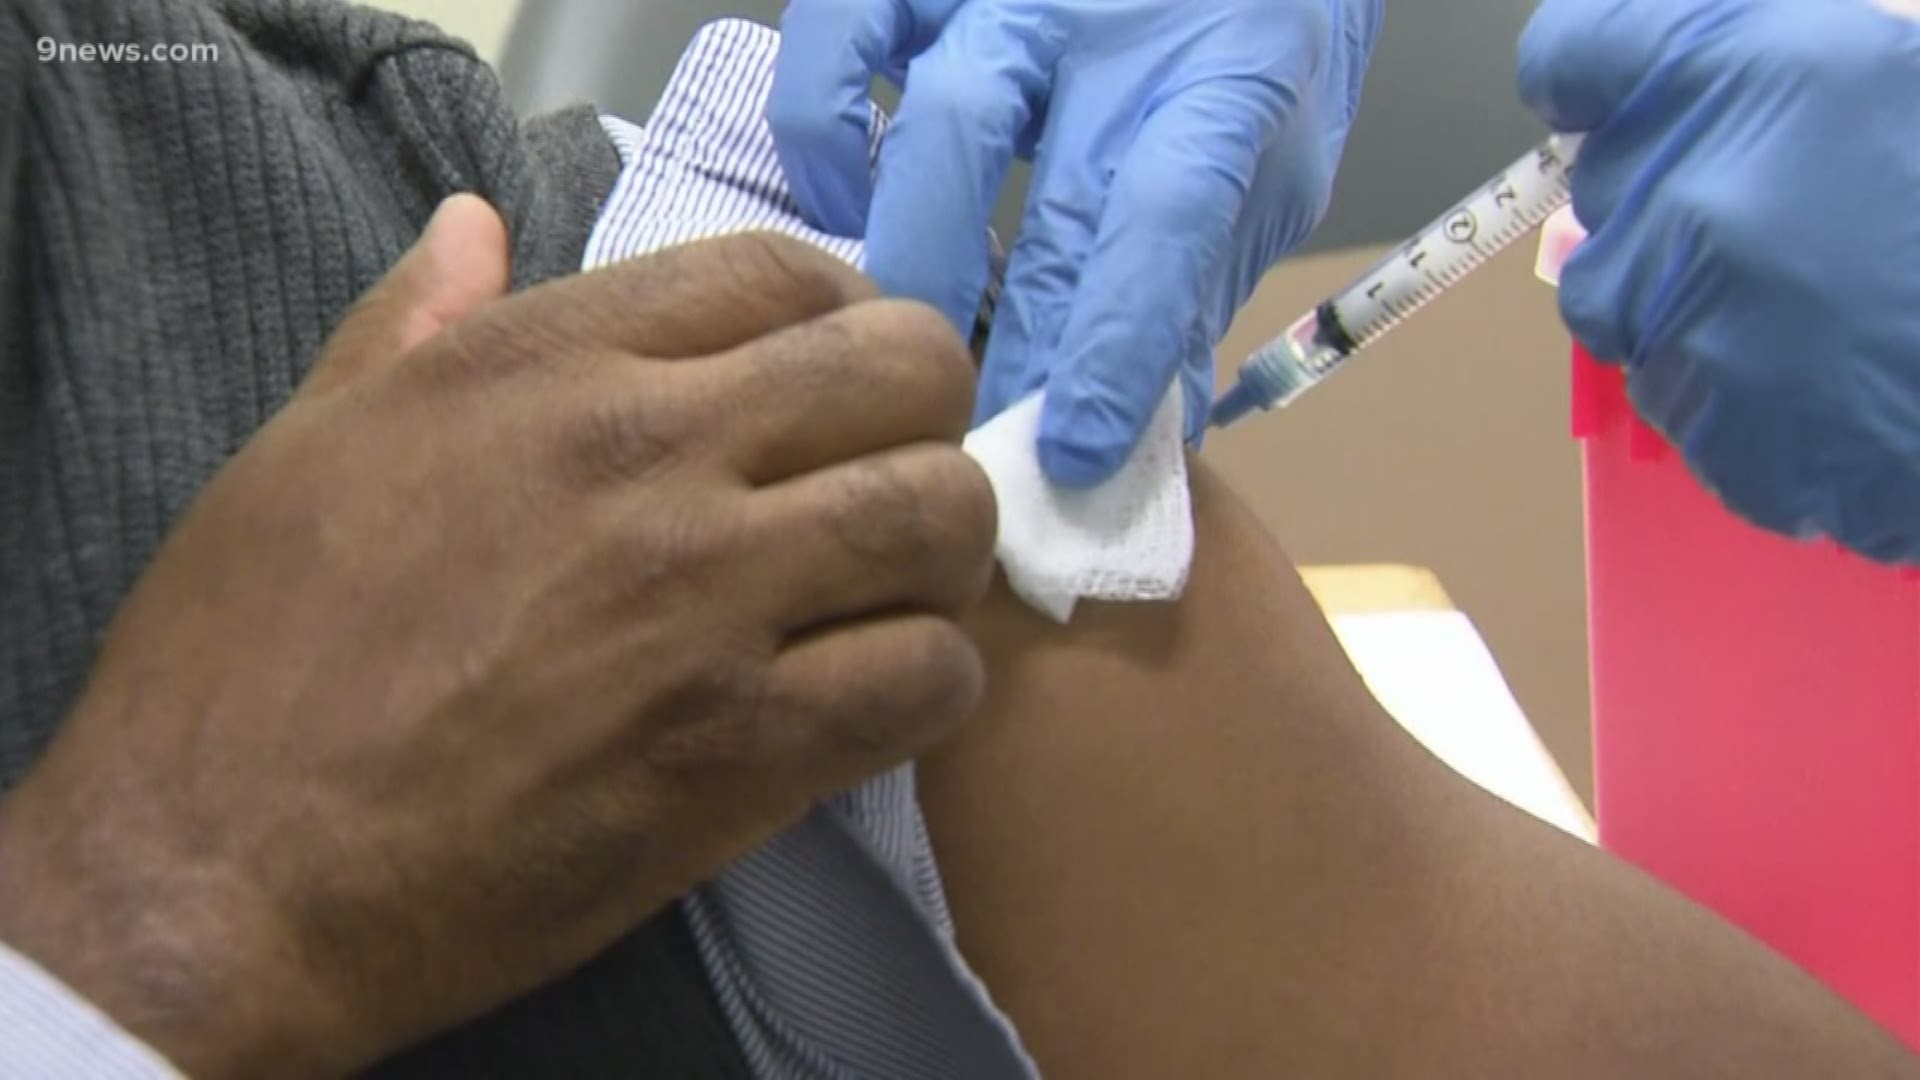 Megan Champion, a nurse practitioner at the CU College of Nursing Sheridan Health Clinic, joined us to talk about why so many seniors don't get the flu shot, and why it's important to do so.